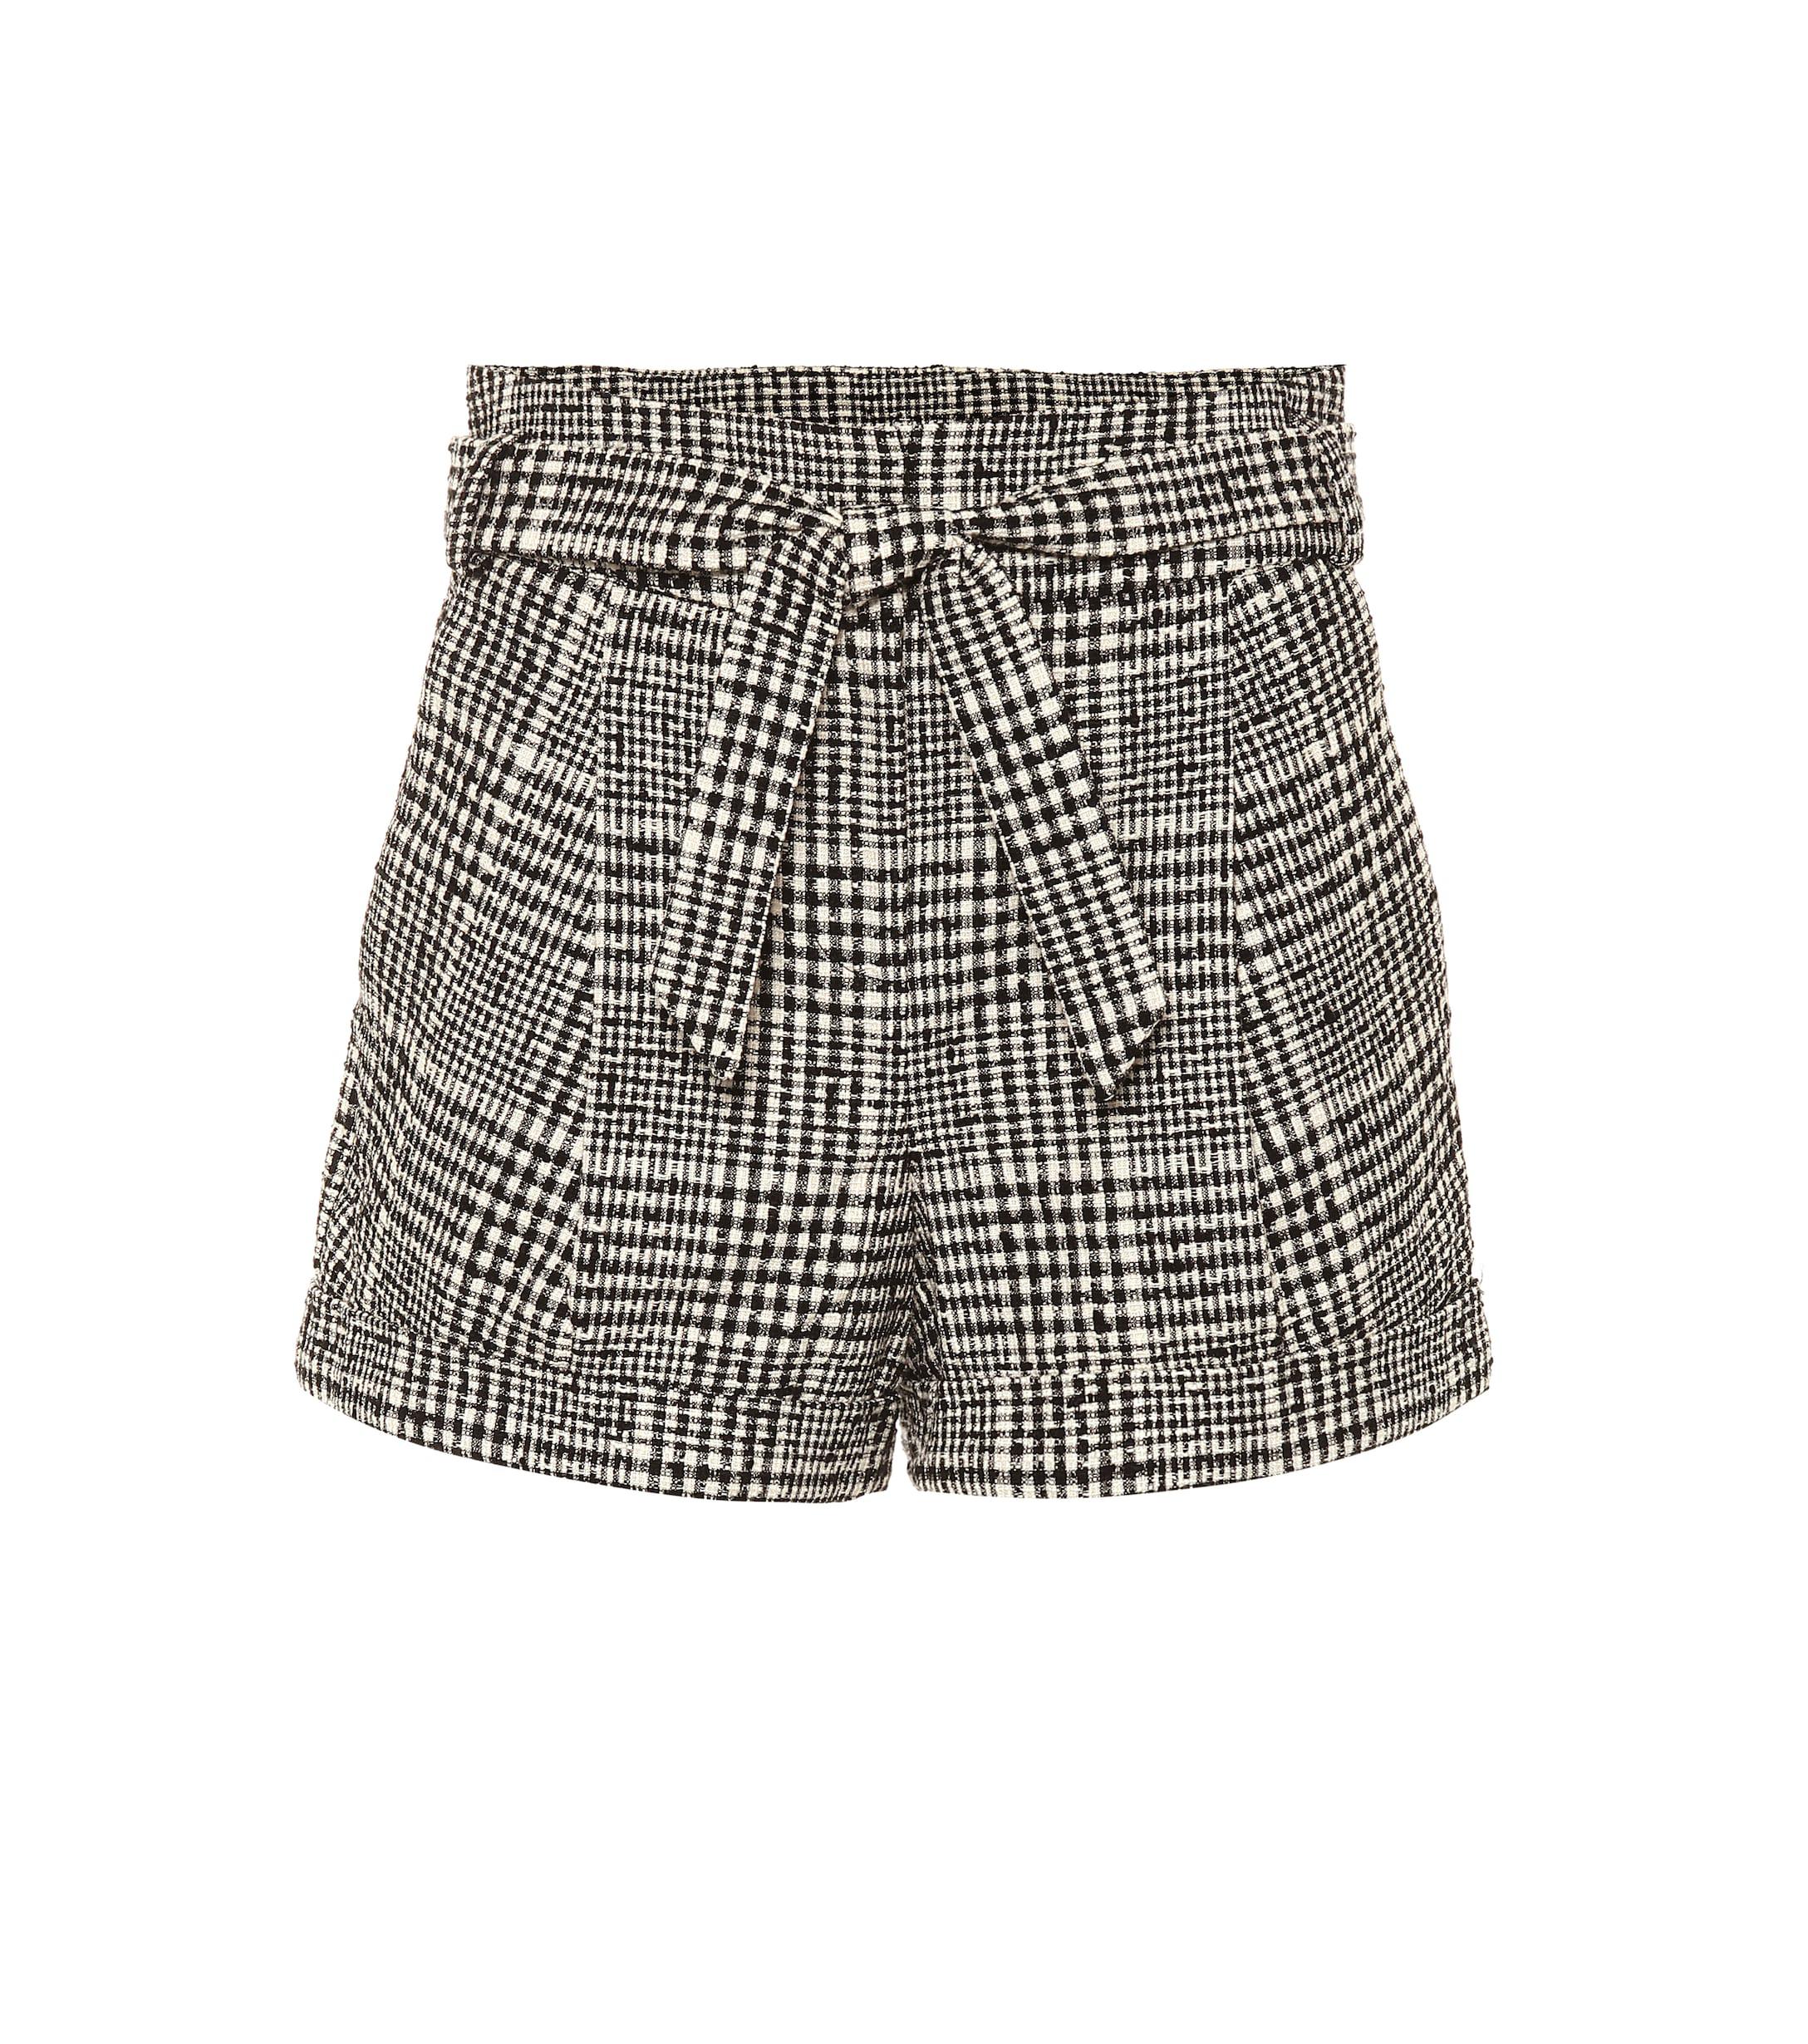 Veronica Beard Belted Check Cotton Shorts in Black/White (Black) - Save ...